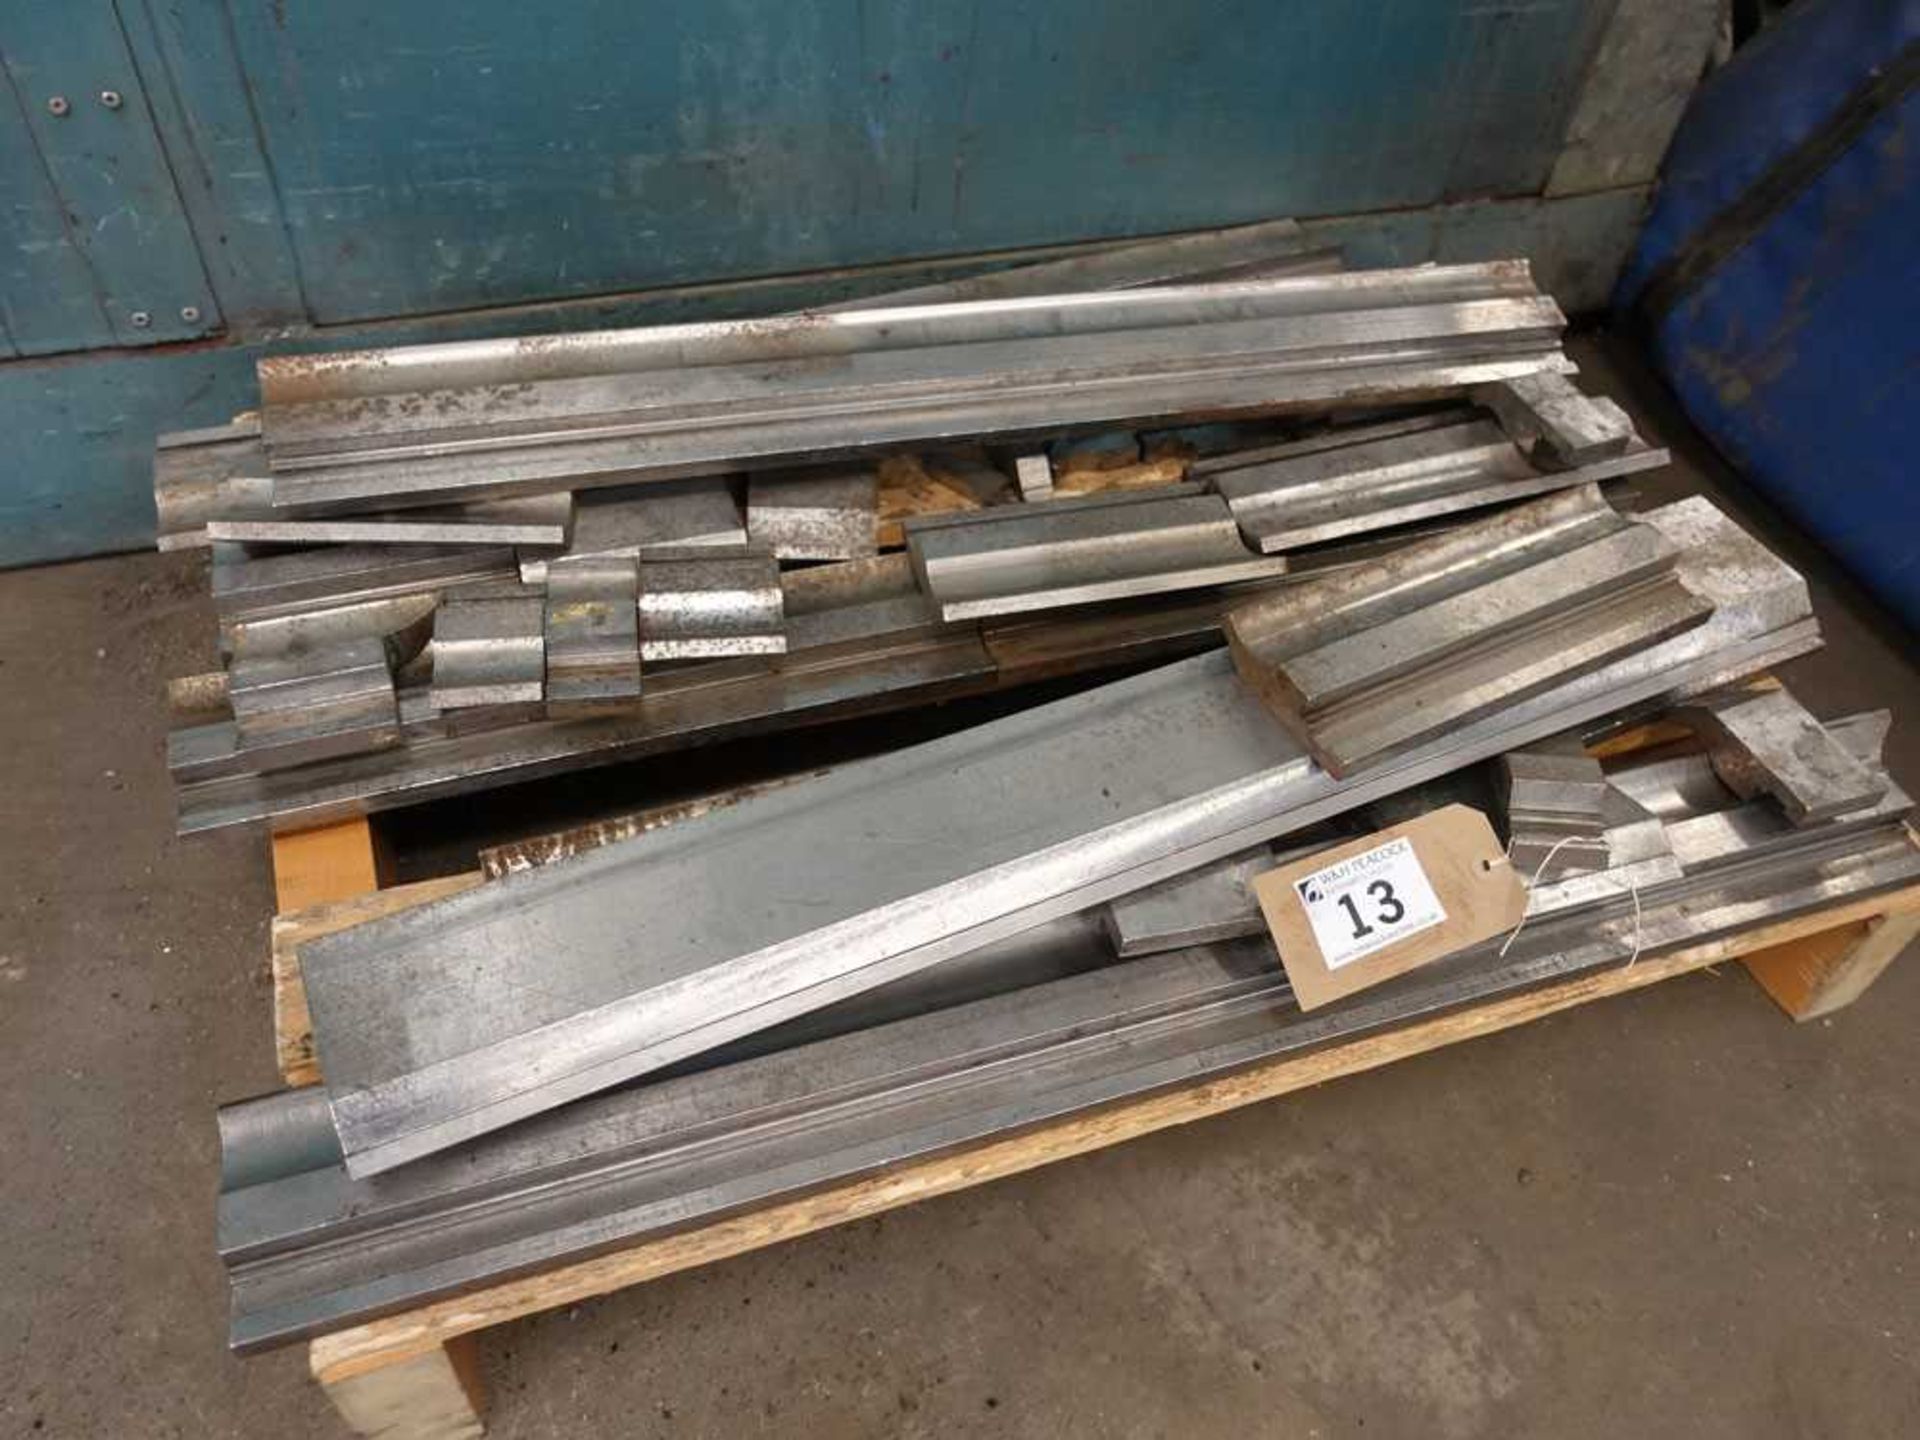 +VAT Approximately 32 pieces of press brake tooling